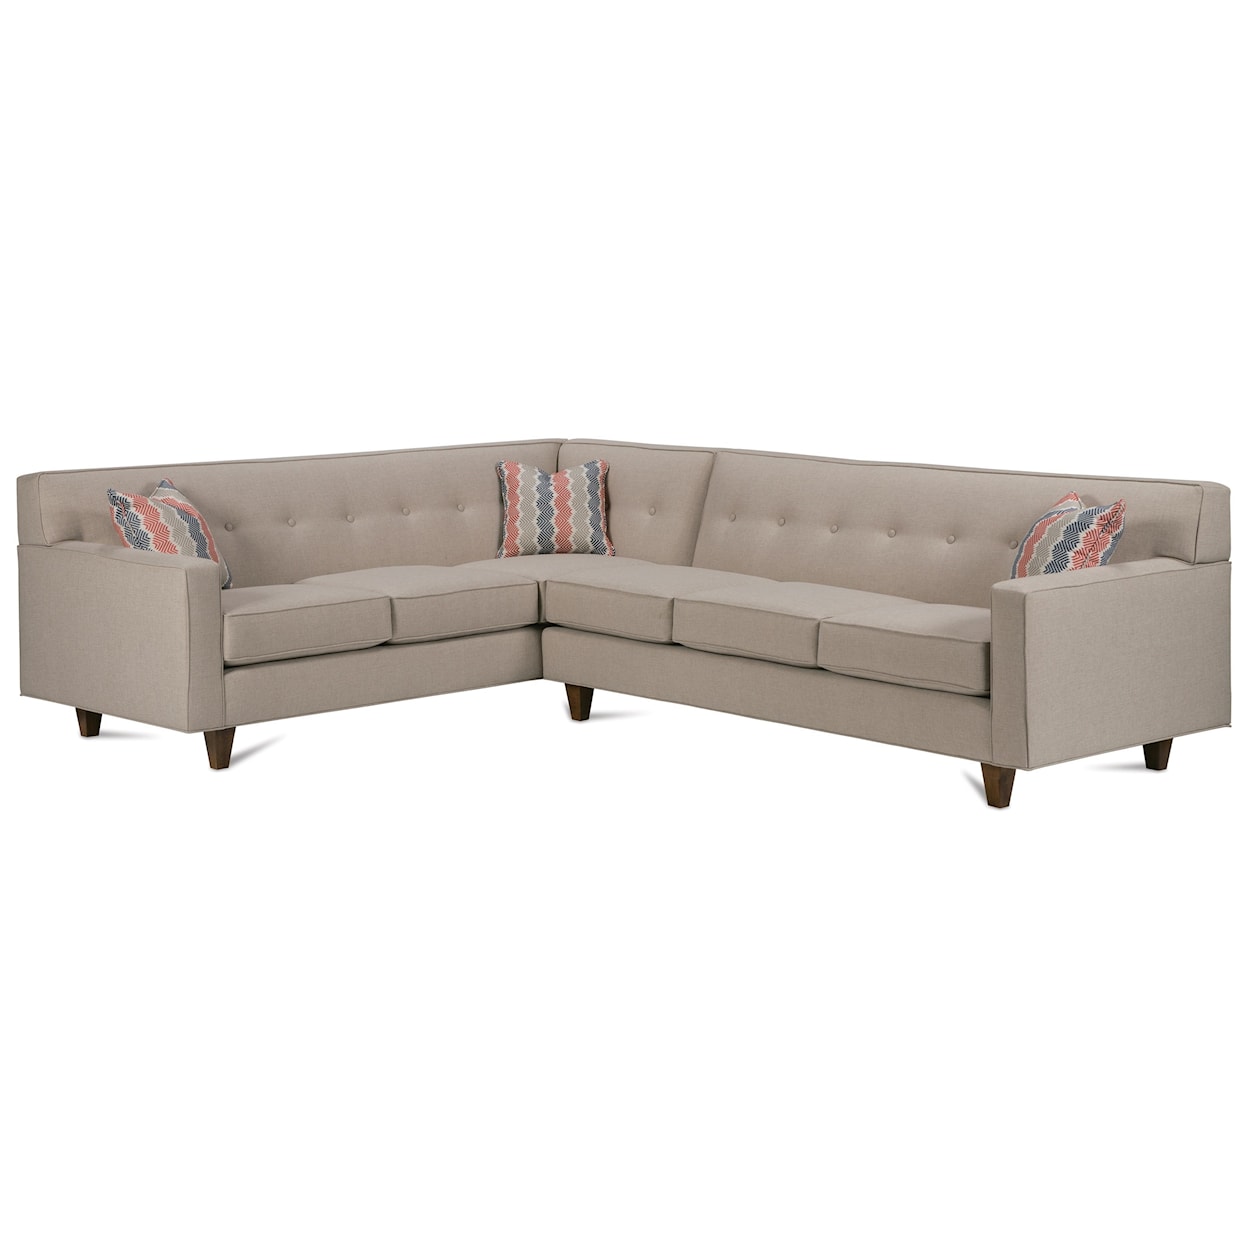 Rowe Dorset Corner Sectional with Tufted Back